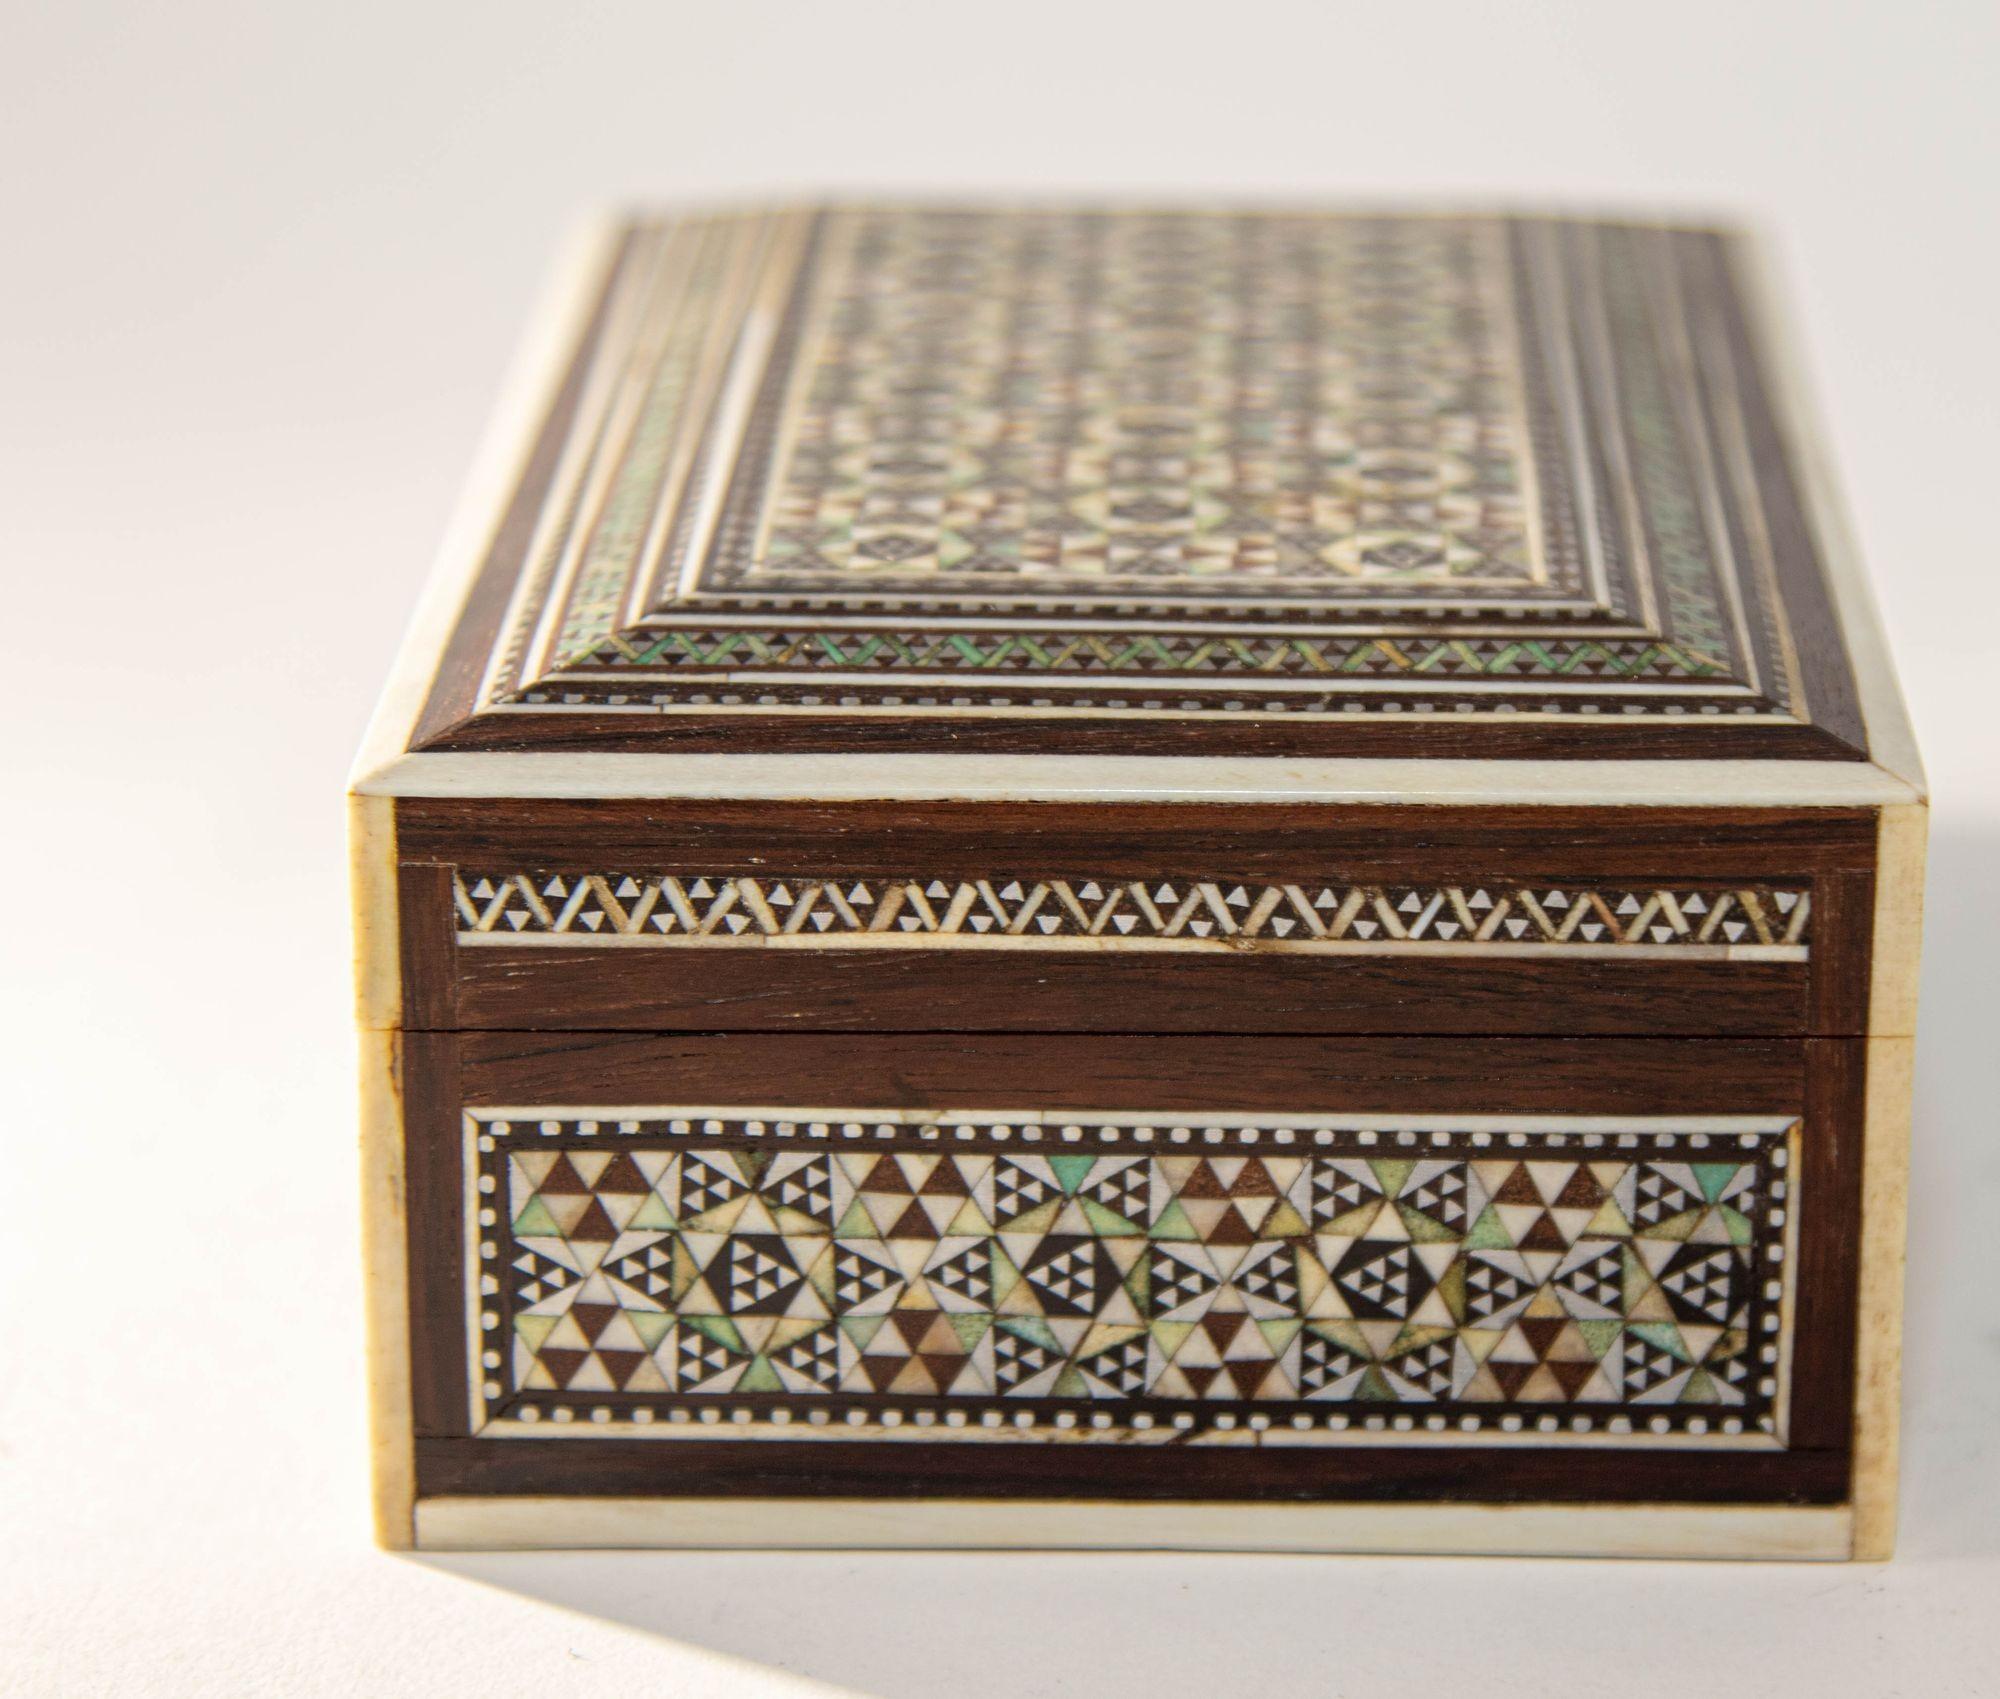 1940s Mother of Pearl Inlaid Decorative Middle Eastern Islamic Box In Good Condition For Sale In North Hollywood, CA